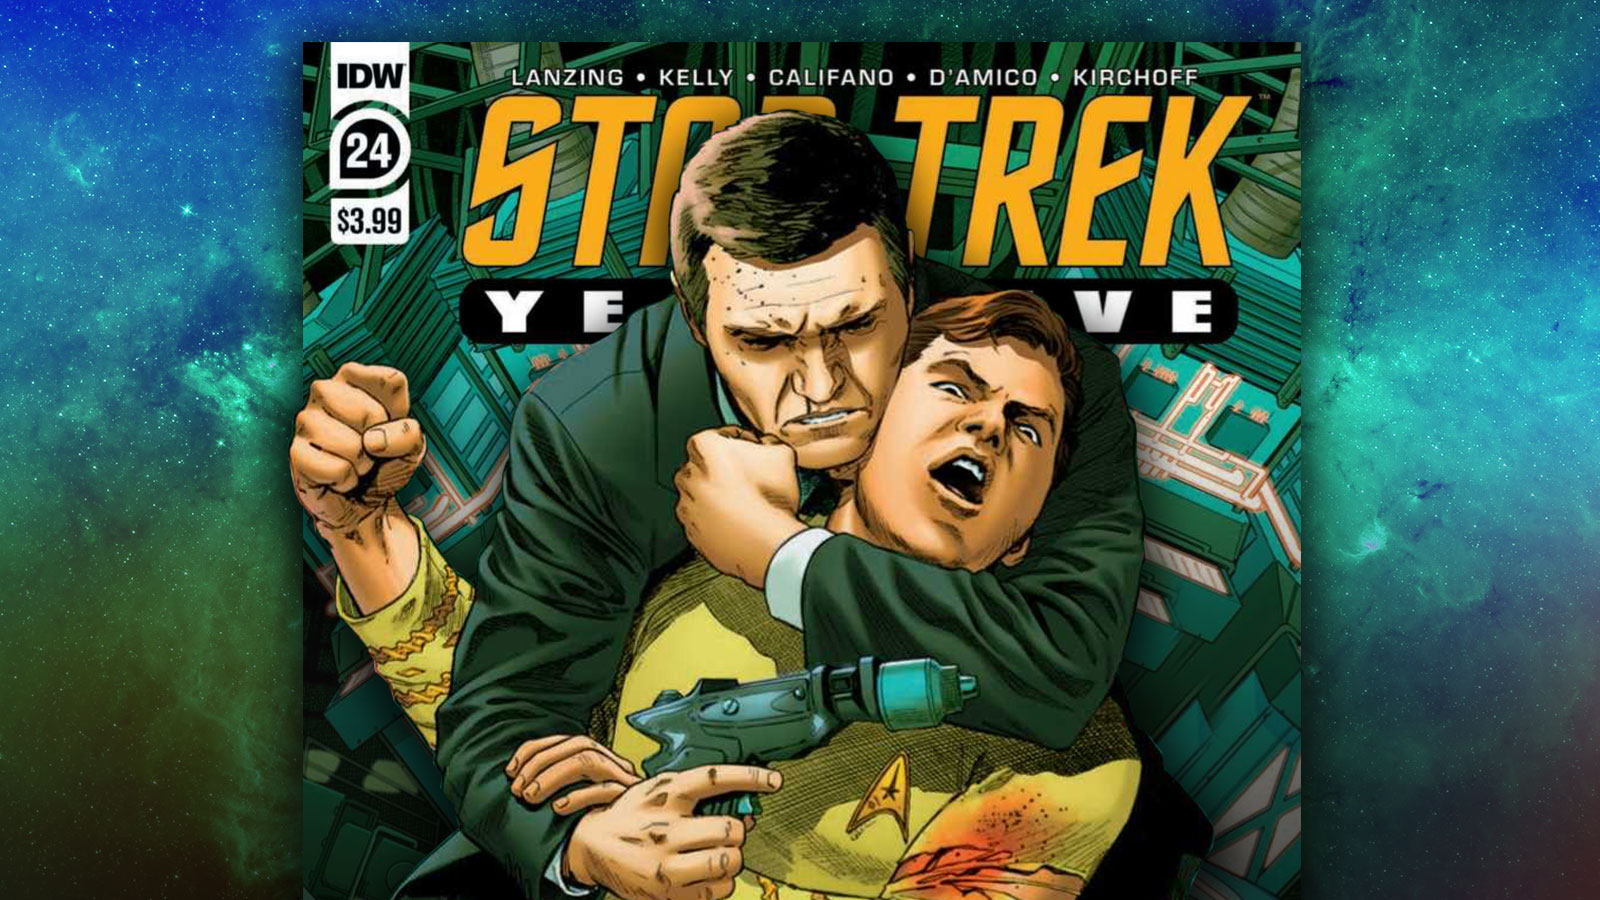 Star Trek: Year Five – Issue 24 Review: All Good Comics…